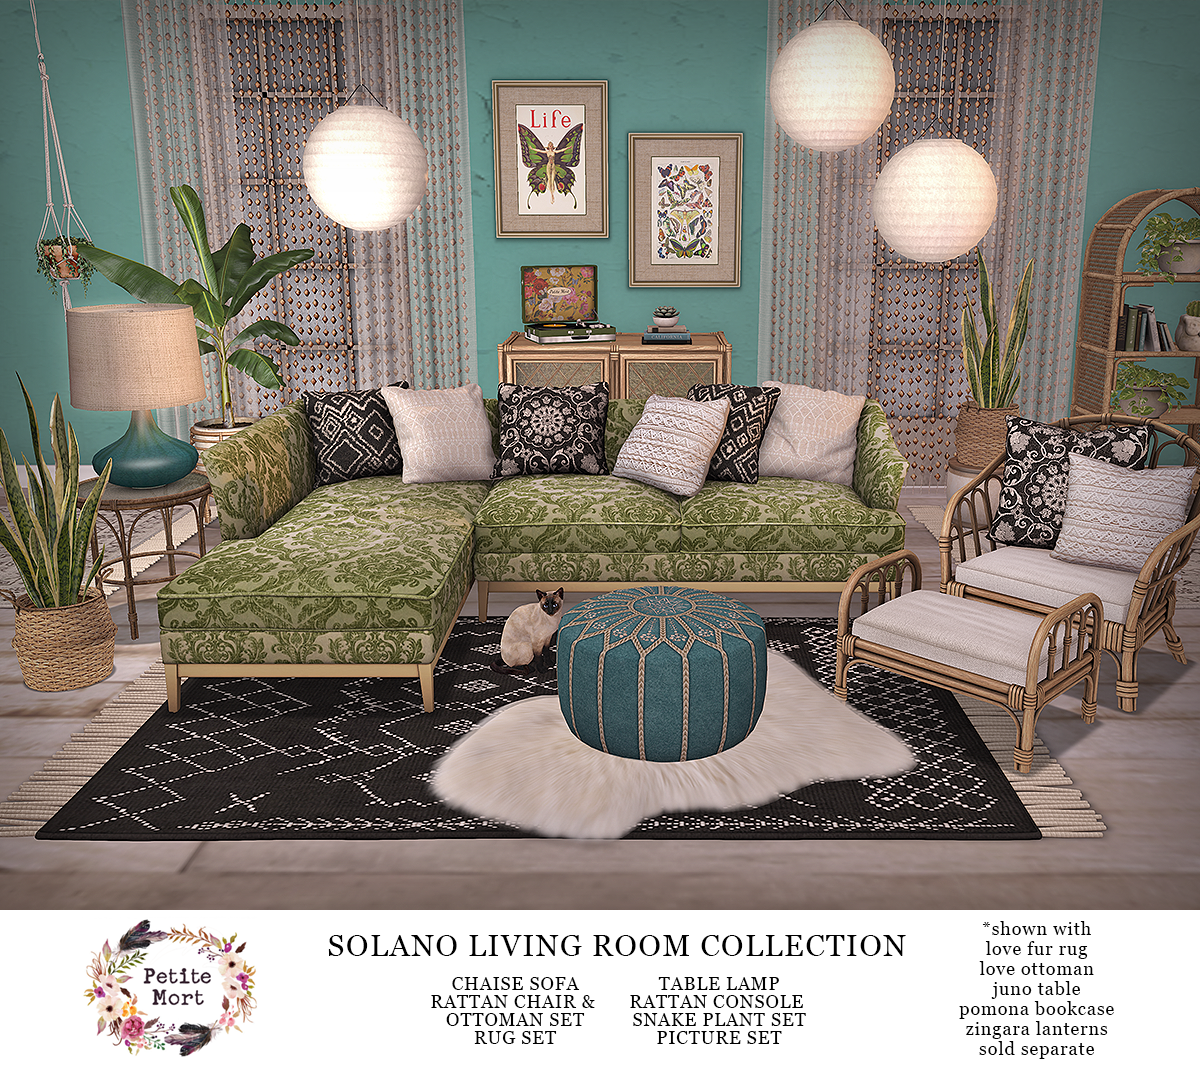 Petite Mort – Solano Living Room Collection